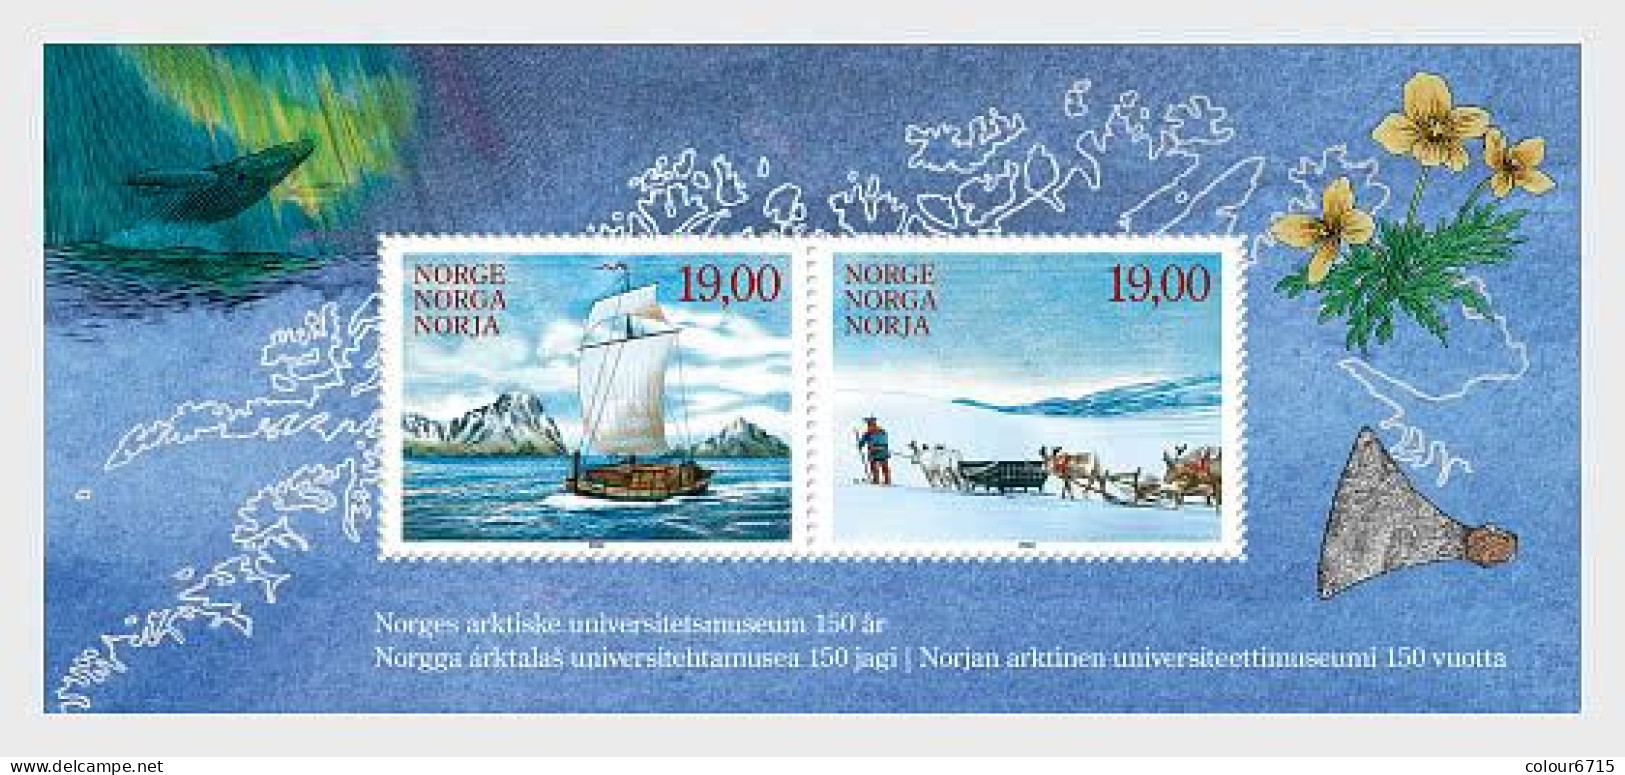 Norway 2022 Arctic University Museum Of Norway 150th Anniversary Stamp MS/Block MNH - Unused Stamps